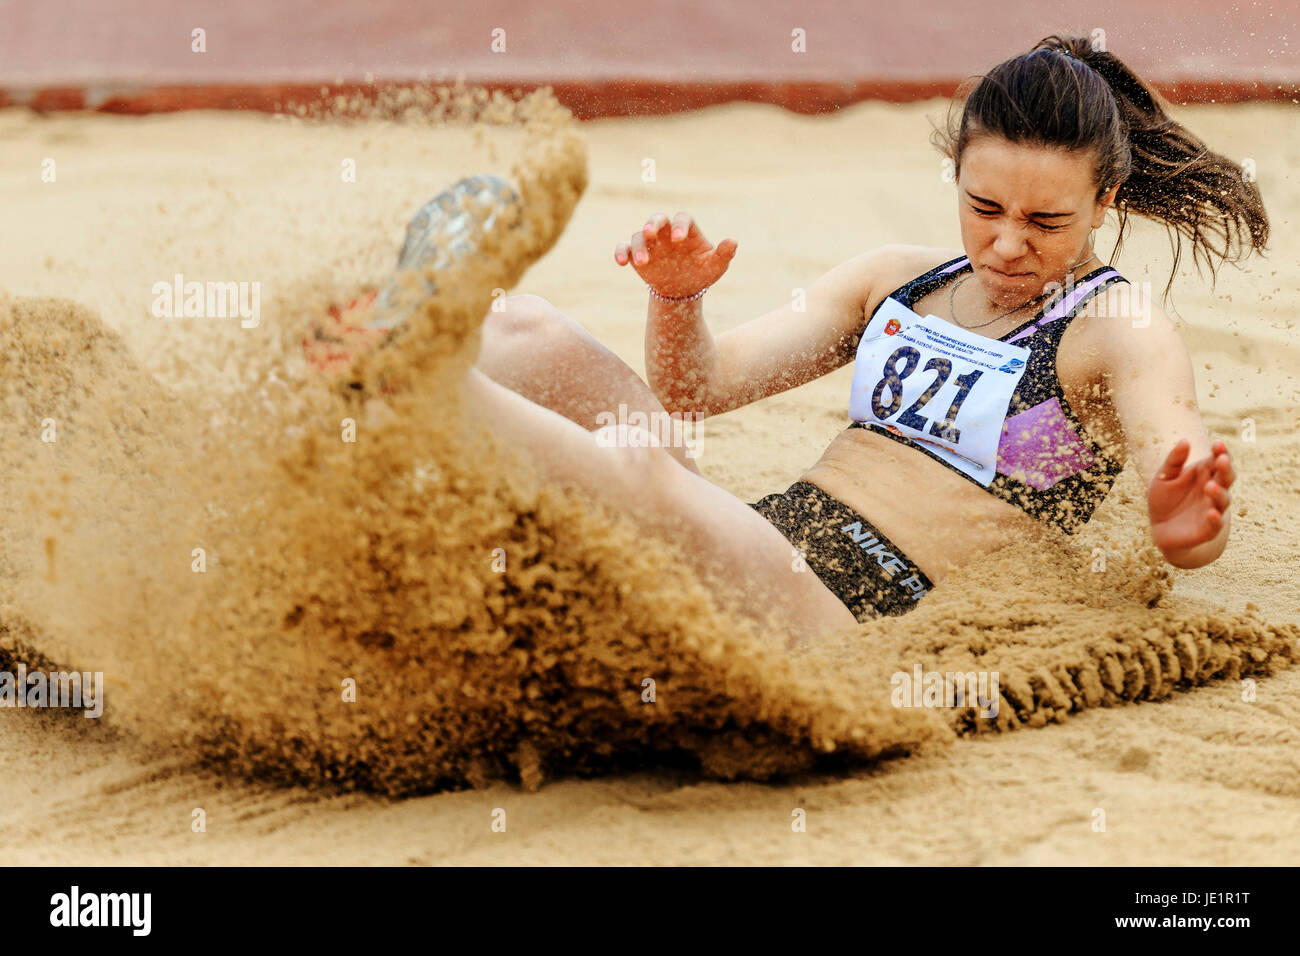 woman athlete landing in sand long jump during UrFO Championship in athletics Stock Photo